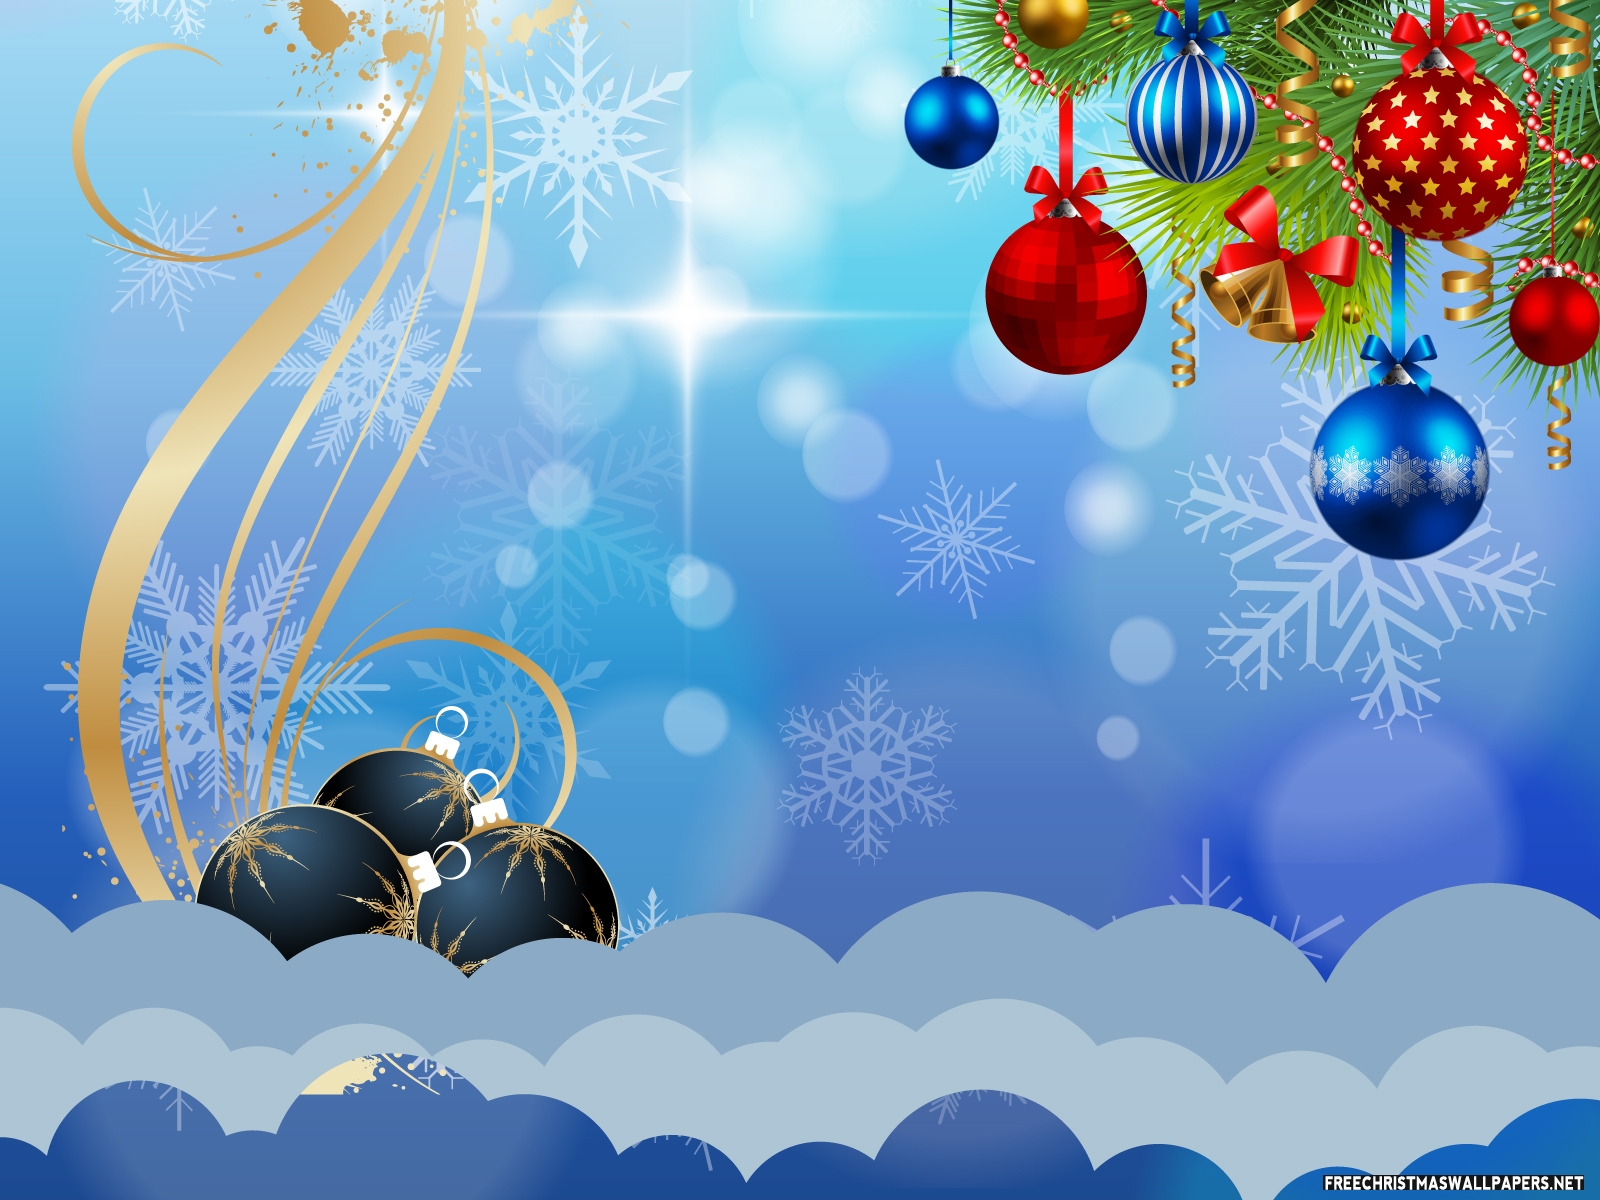 New Collection Of HD Christmas Wallpaper Psdre